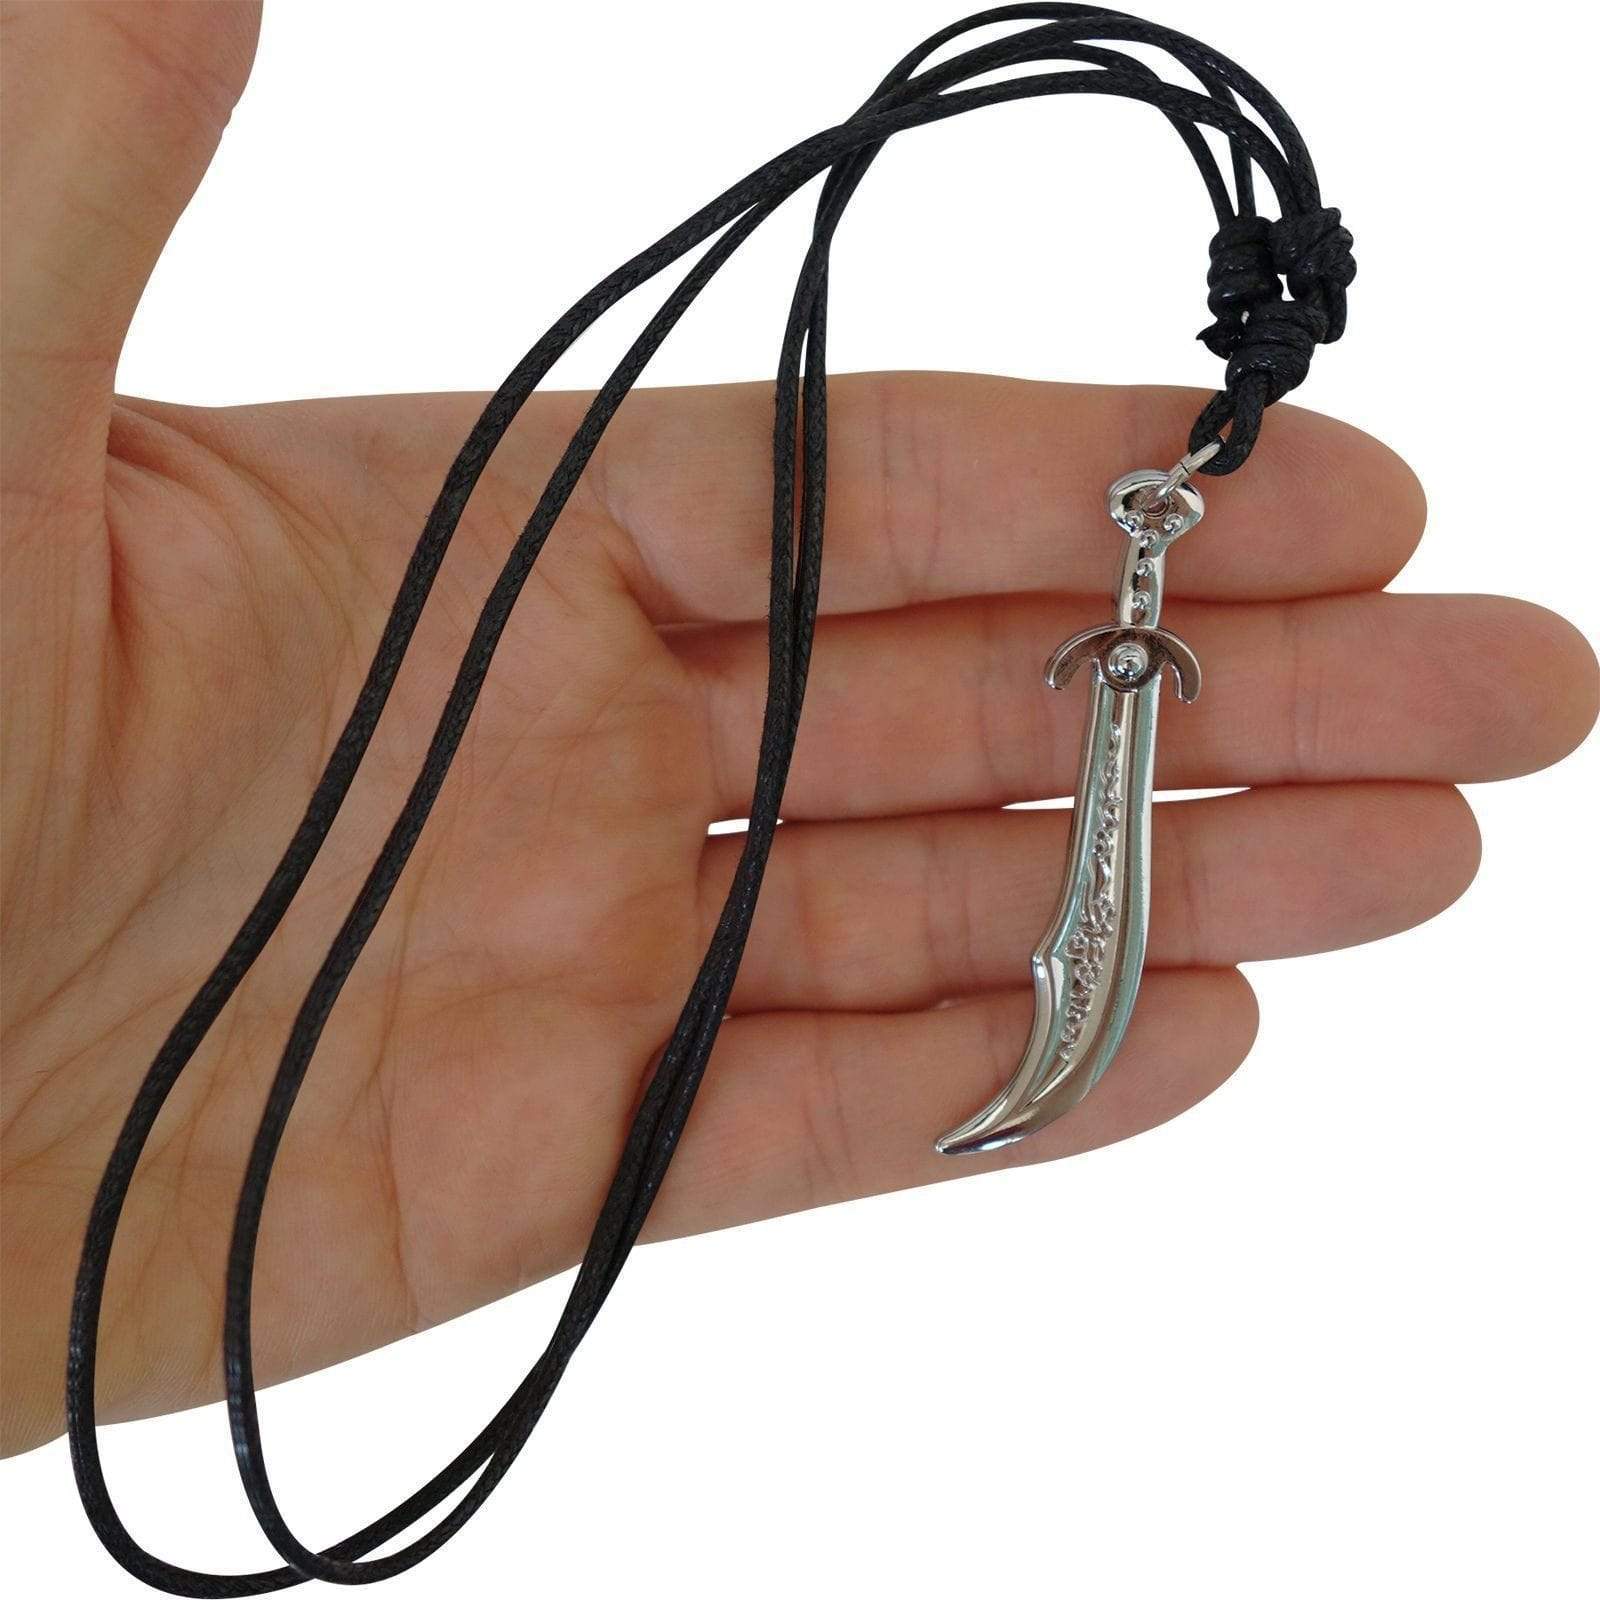 3 Step Guide To Choosing Your Ideal Hidden Knife Necklace